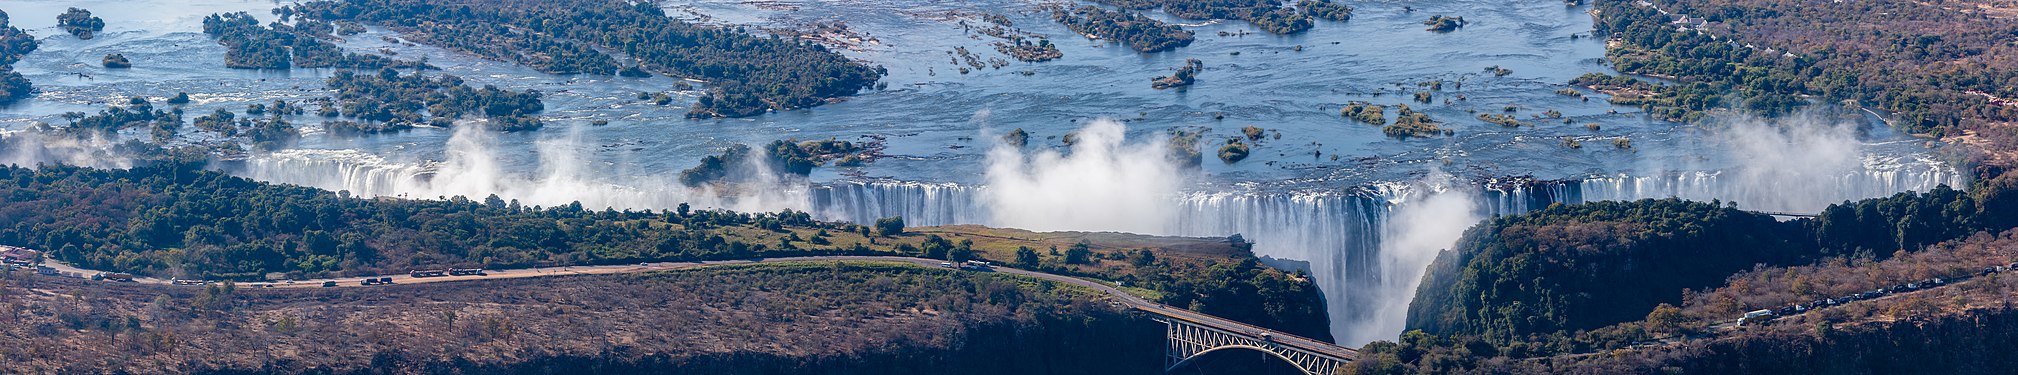 Aerial view of the Victoria Falls between Zambia and Zimbabwe.